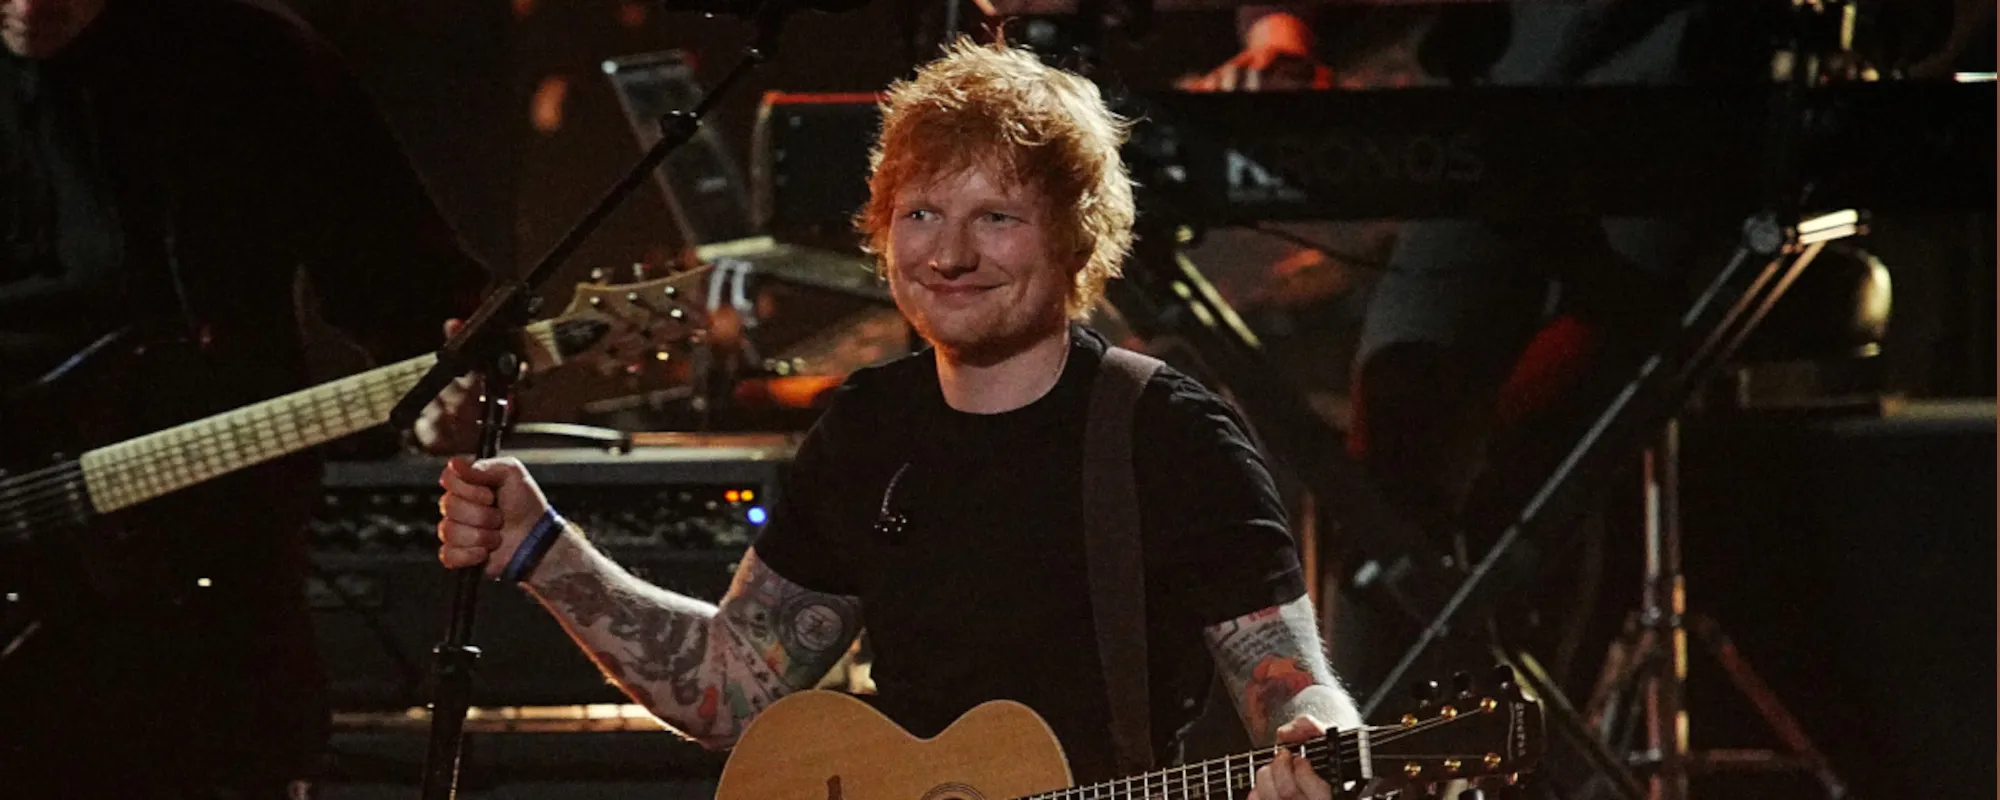 Ed Sheeran Appears In Court, Denies Copyright Allegations on Marvin Gaye’s “Let’s Get It On”